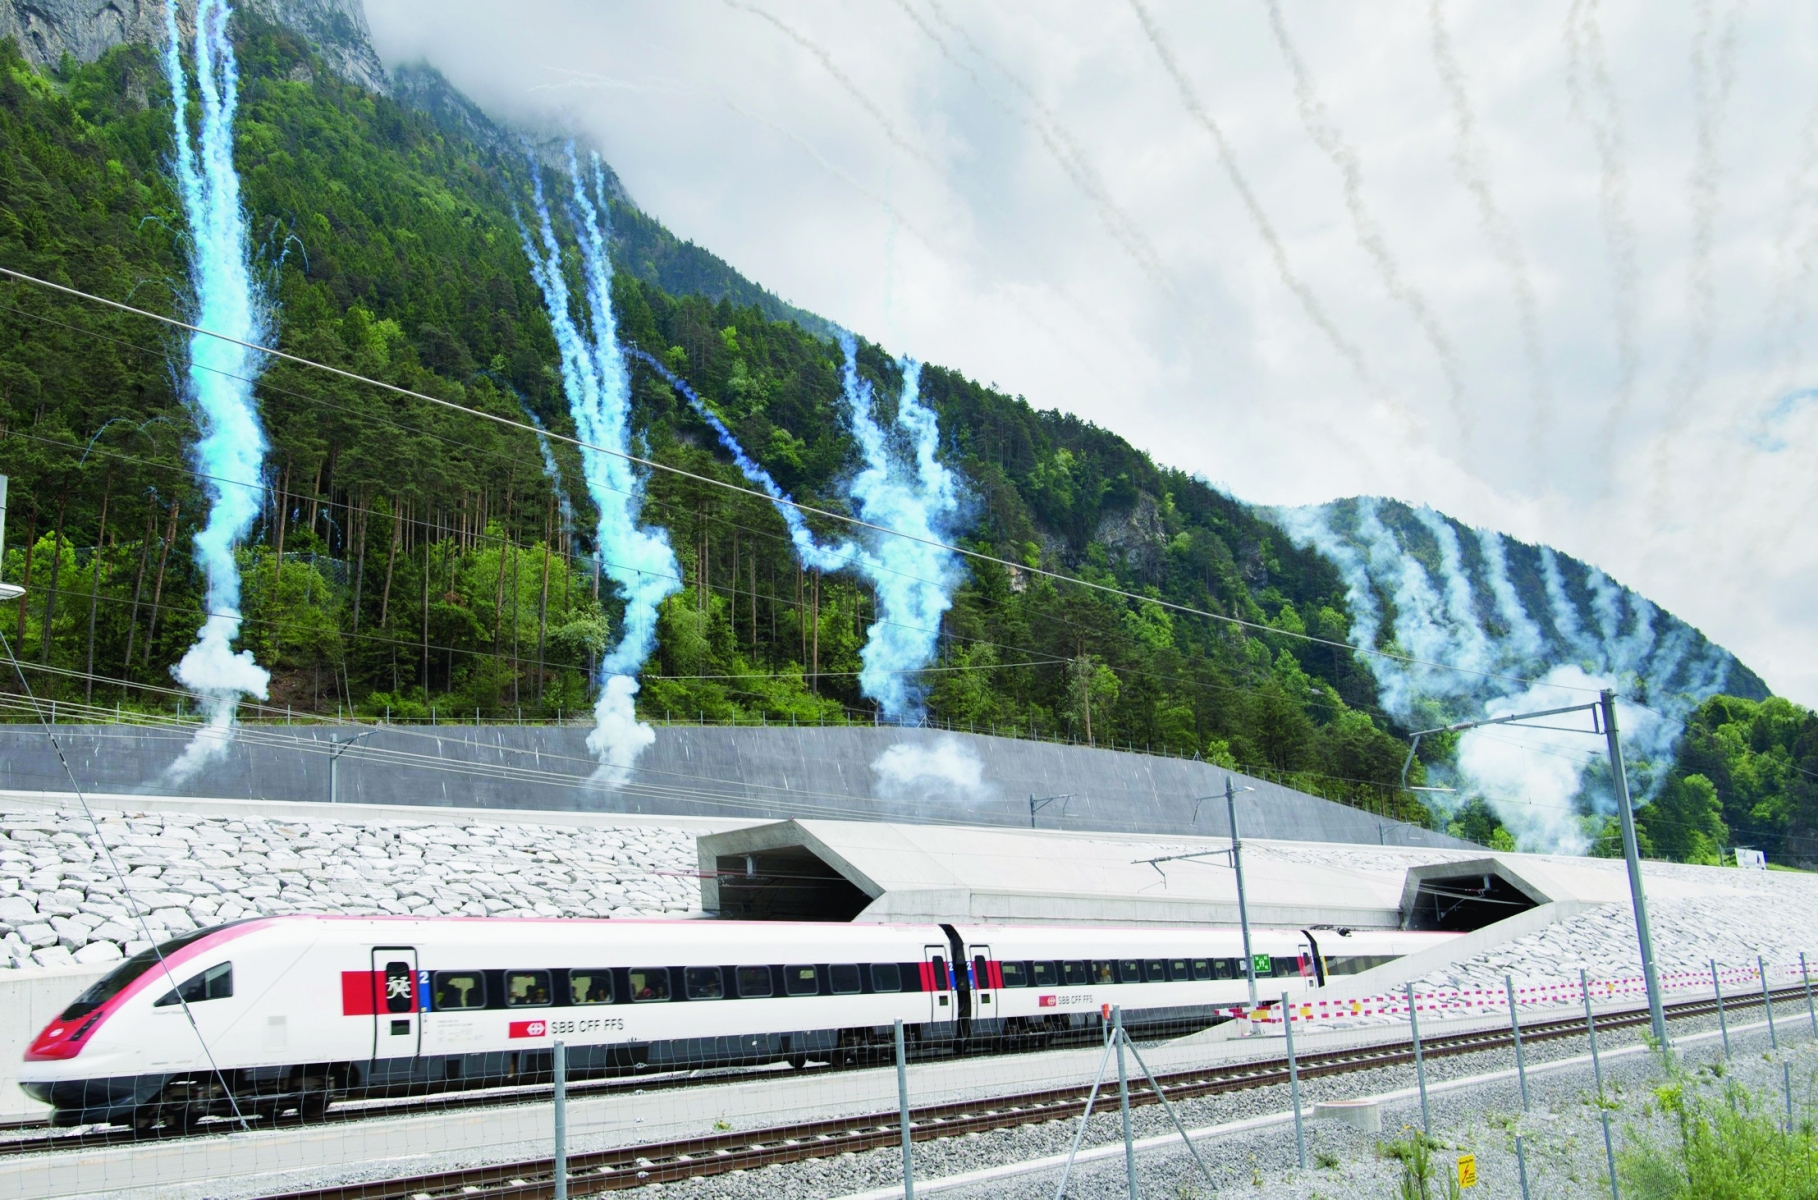 The first train comes out of the tunnel's North portal while fireworks mark the official opening on the opening day of the Gotthard rail tunnel, the longest tunnel in the world, at the North portal near Erstfeld, Switzerland, Wednesday, June 1, 2016. The construction of the 57 kilometer long tunnel began in 1999, the breakthrough was in 2010. After the official opening on June 1, the commercial opperation will commence on December 2016. (KEYSTONE/Laurent Gillieron) SWITZERLAND GOTTHARD TUNNEL OPENING